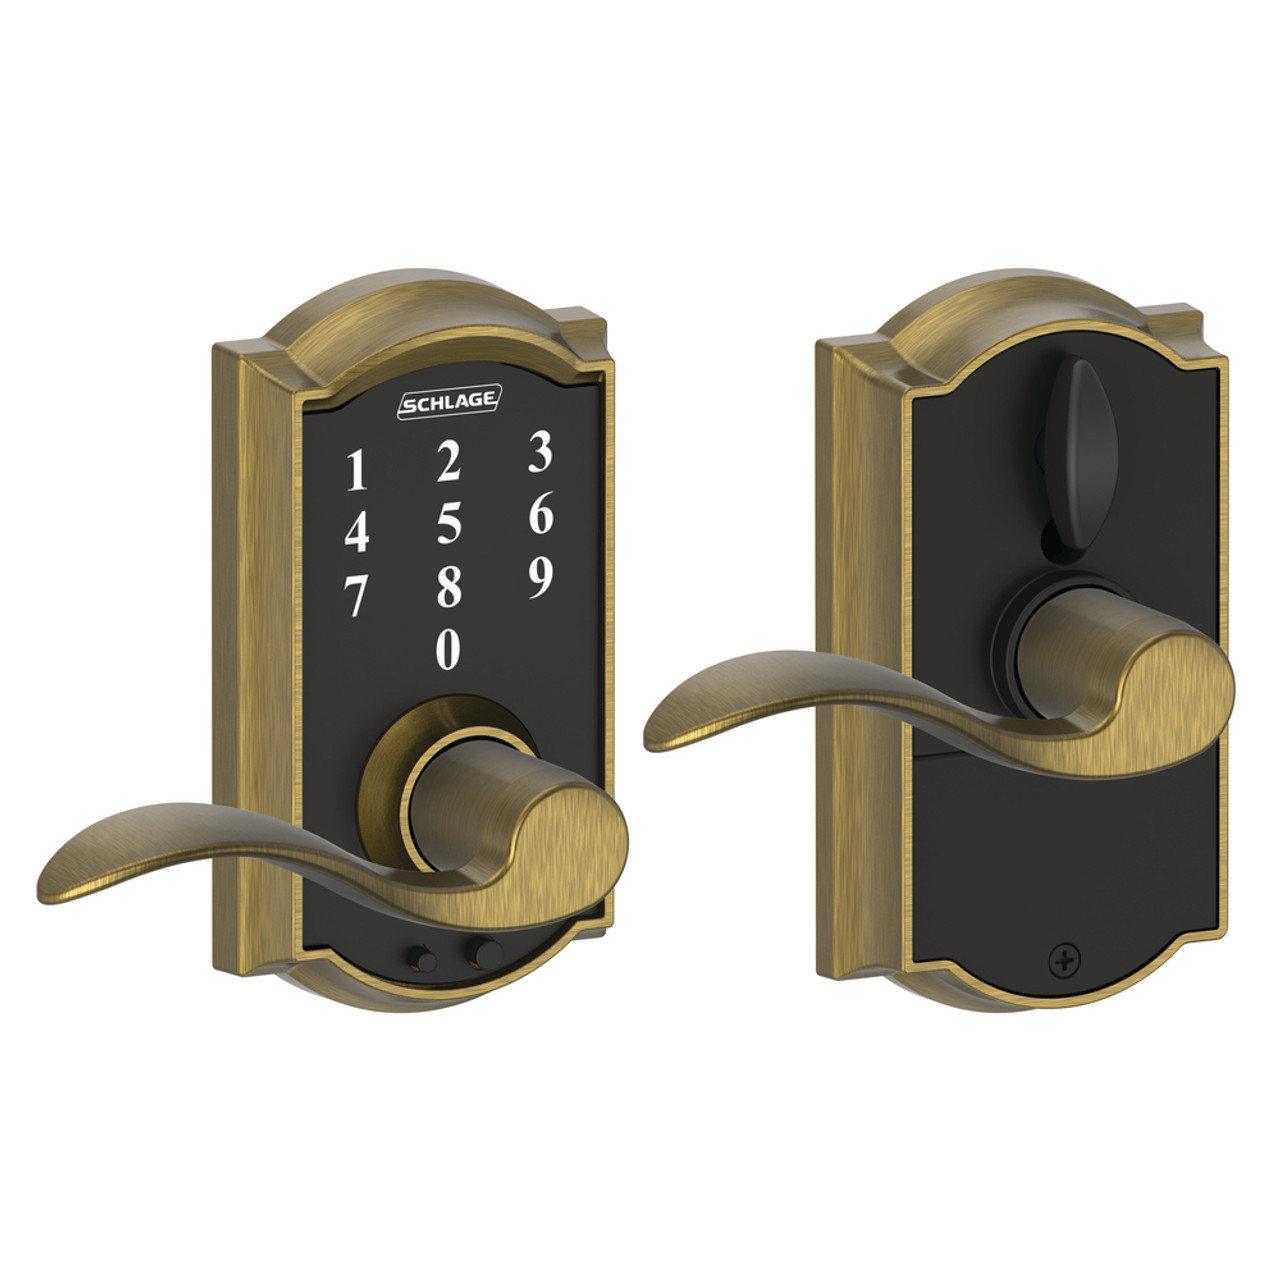 SCHLAGE FE695 Schlage Touch Entry Electronic Lever